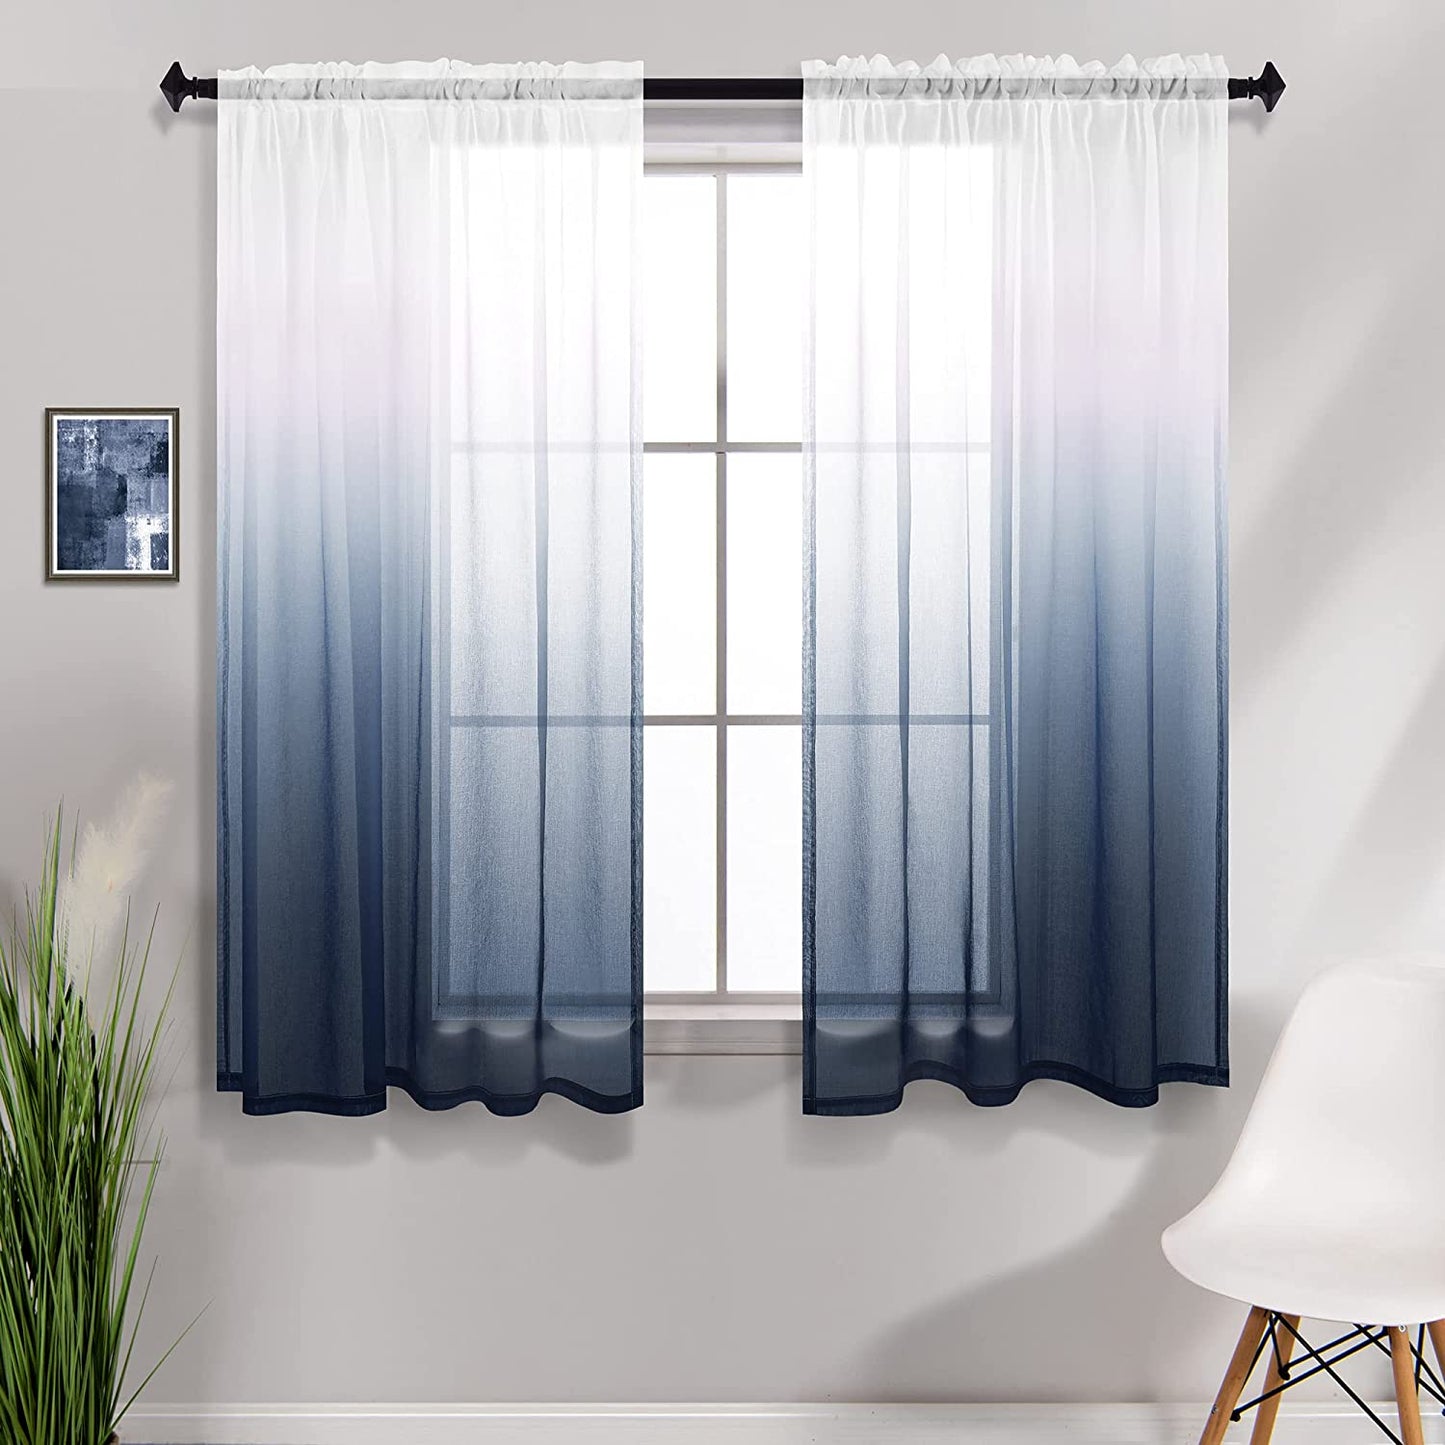 KOUFALL Sage Green Curtains 63 Inch Length for Living Room,2 Panel Set Rod Pocket Boho Curtains for Bedroom 63 Inches Long  KOUFALL TEXTILE Navy Blue 42X45 